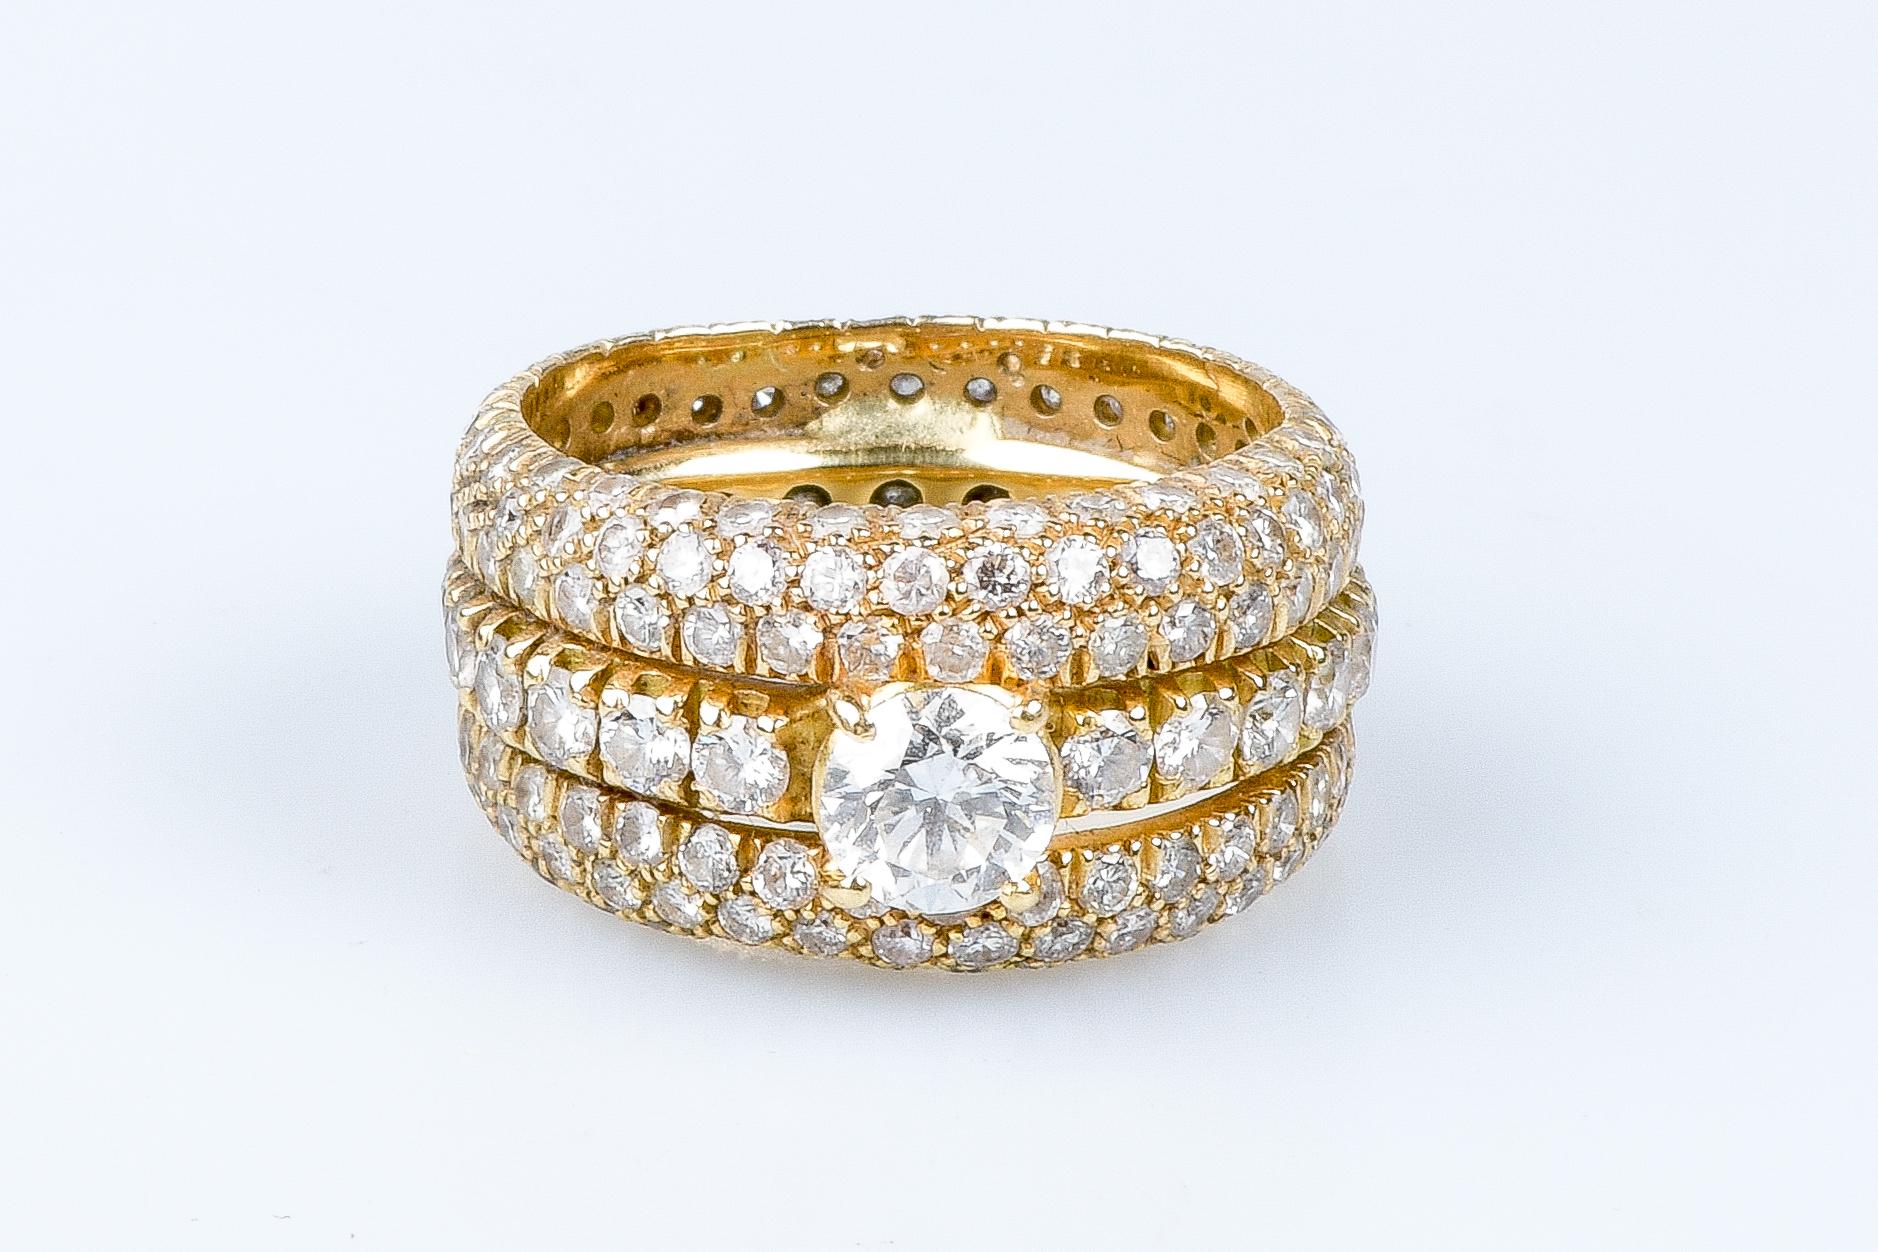 18 carat yellow gold ring designed with 1 central round brillant cut diamond weighing 0.73 carats, surrounded by 20 round brillant cut diamonds weighing 1.24 carats, by 2 round brillant cut diamonds weighing 0.084 carats, by 1 round brillant cut